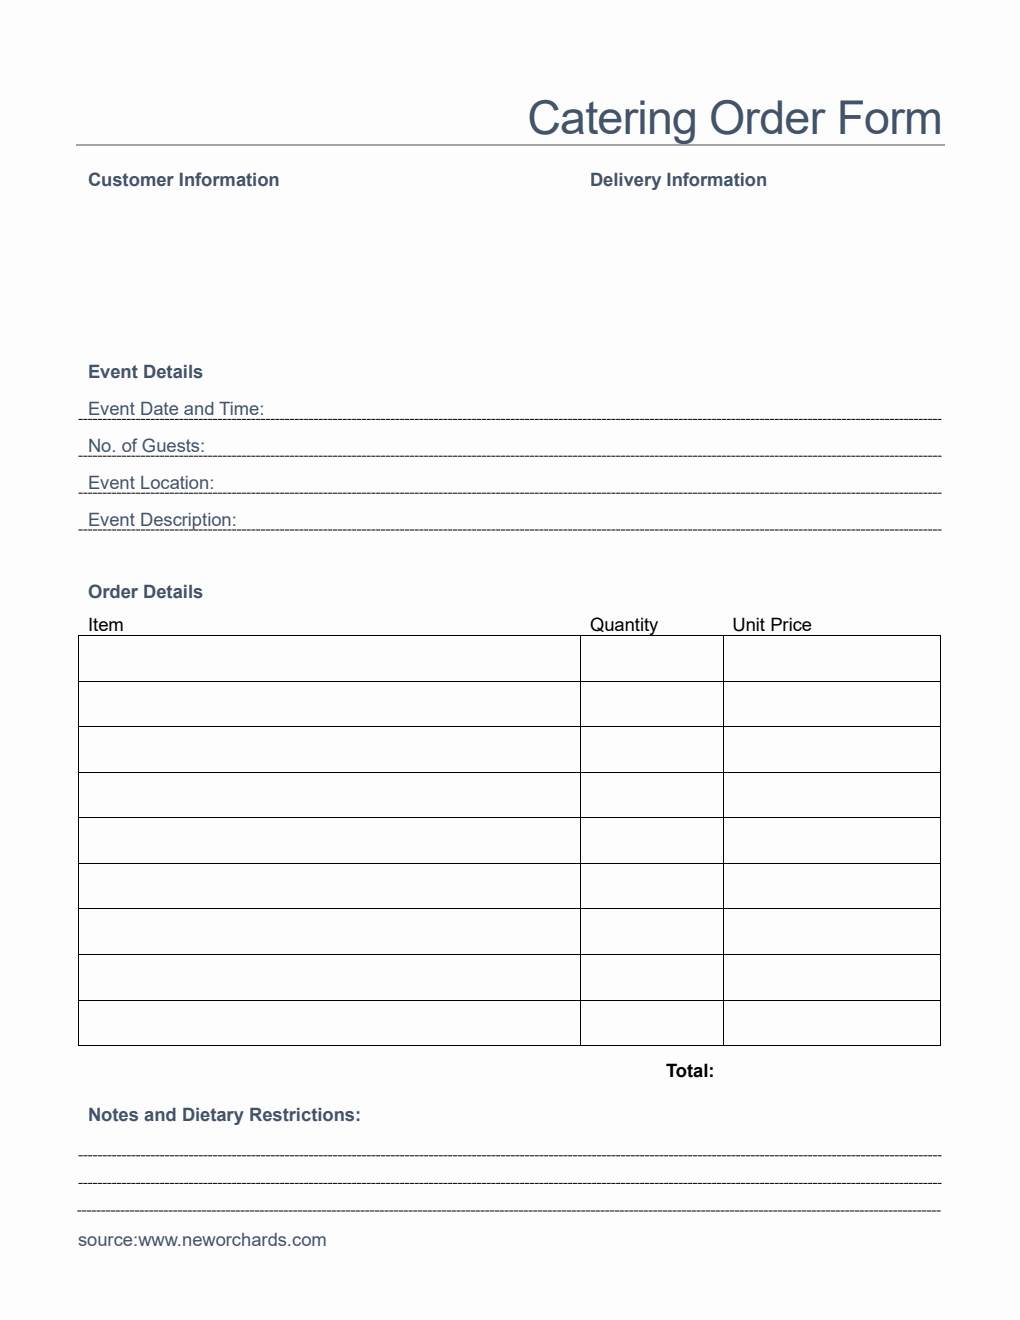 Blank Catering Order Form Template in PDF